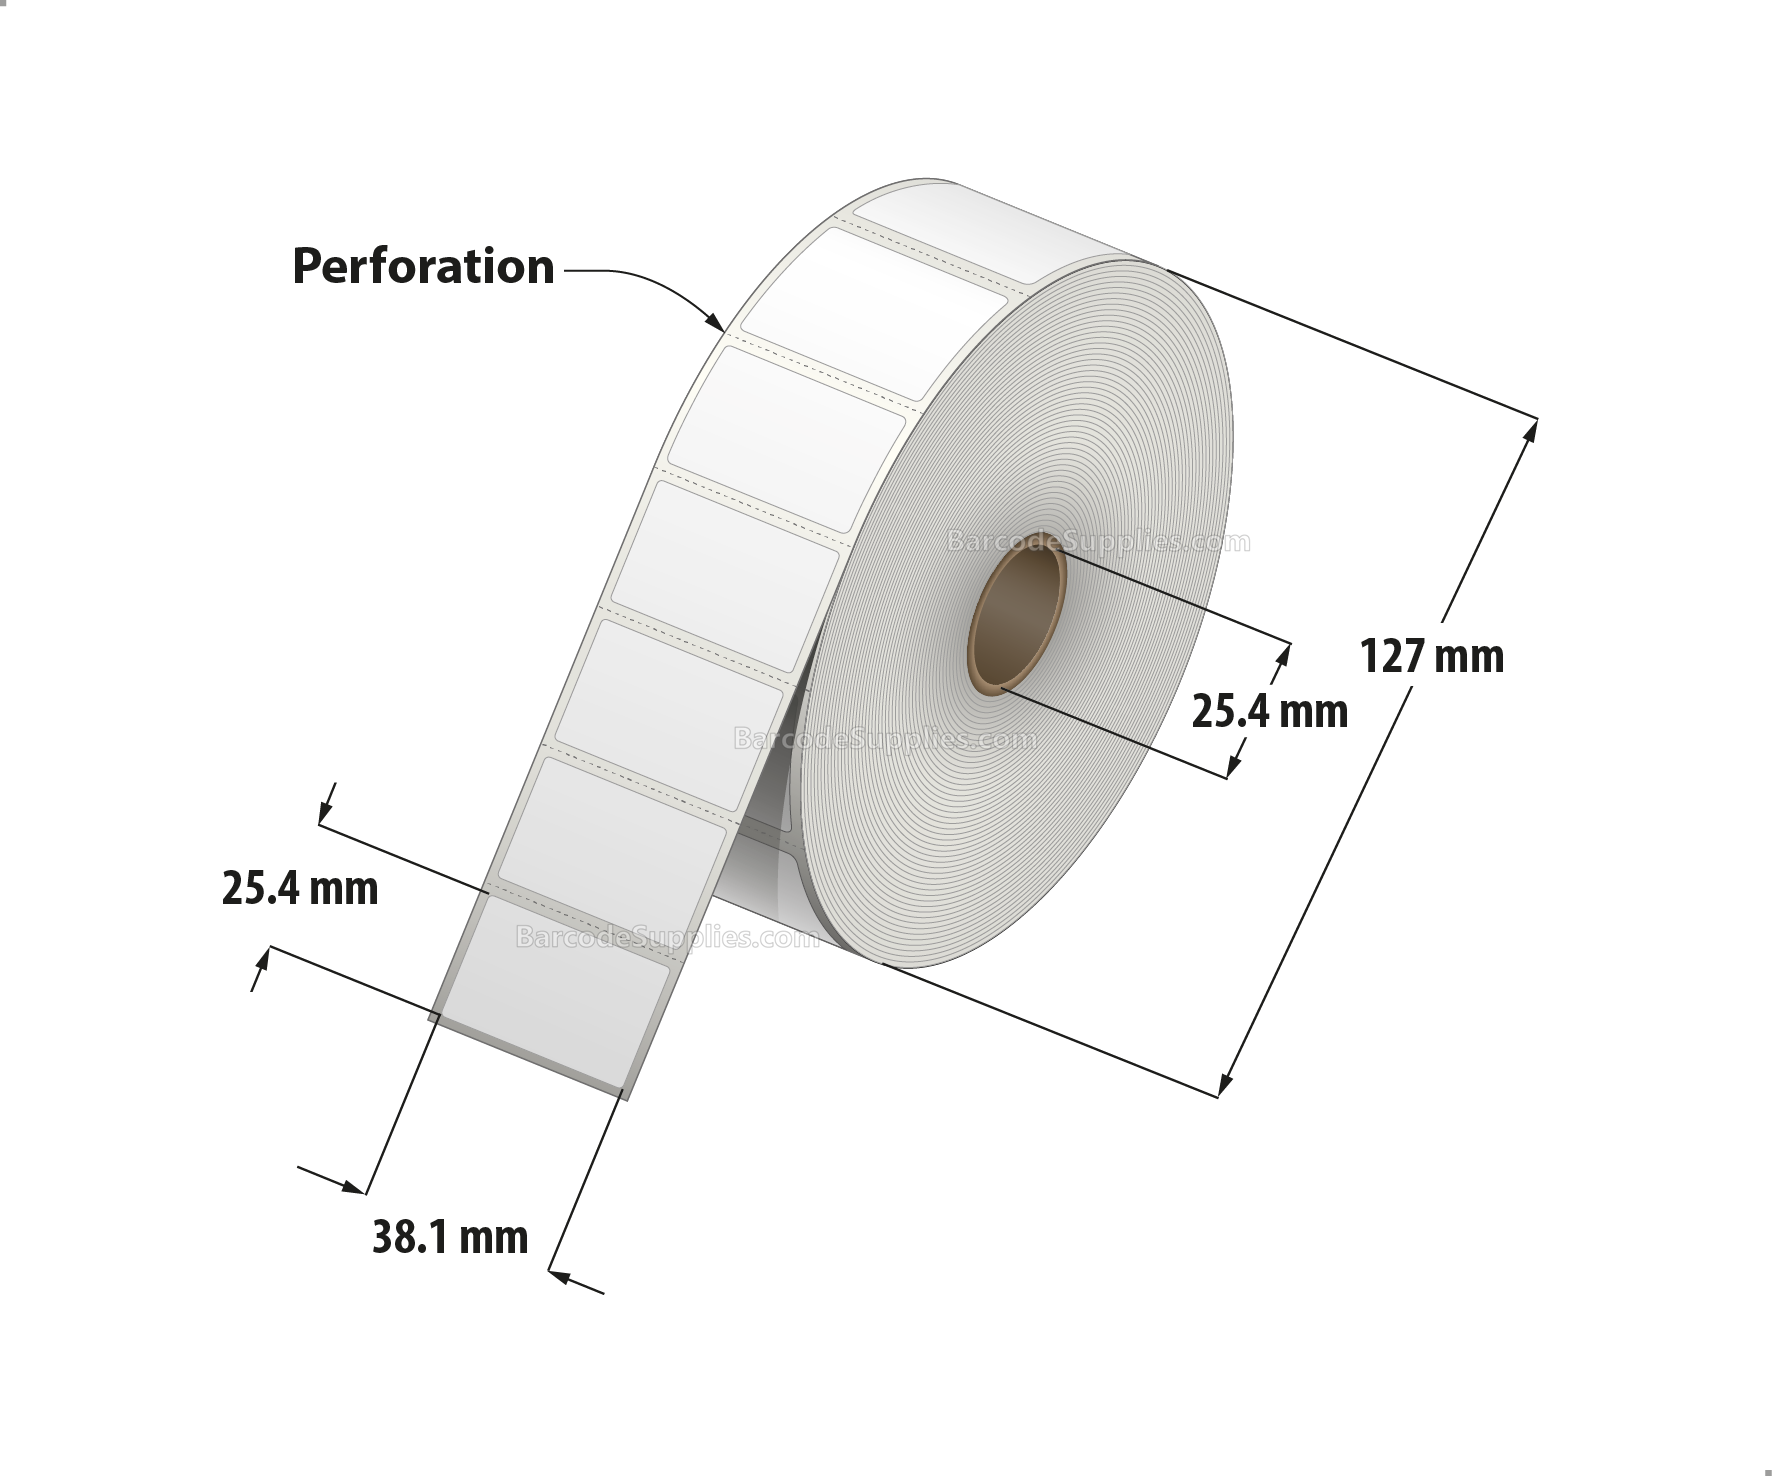 1.5 x 1 Direct Thermal White Labels With Permanent Acrylic Adhesive - Perforated - 2300 Labels Per Roll - Carton Of 4 Rolls - 9200 Labels Total - MPN: DT151-15PDT